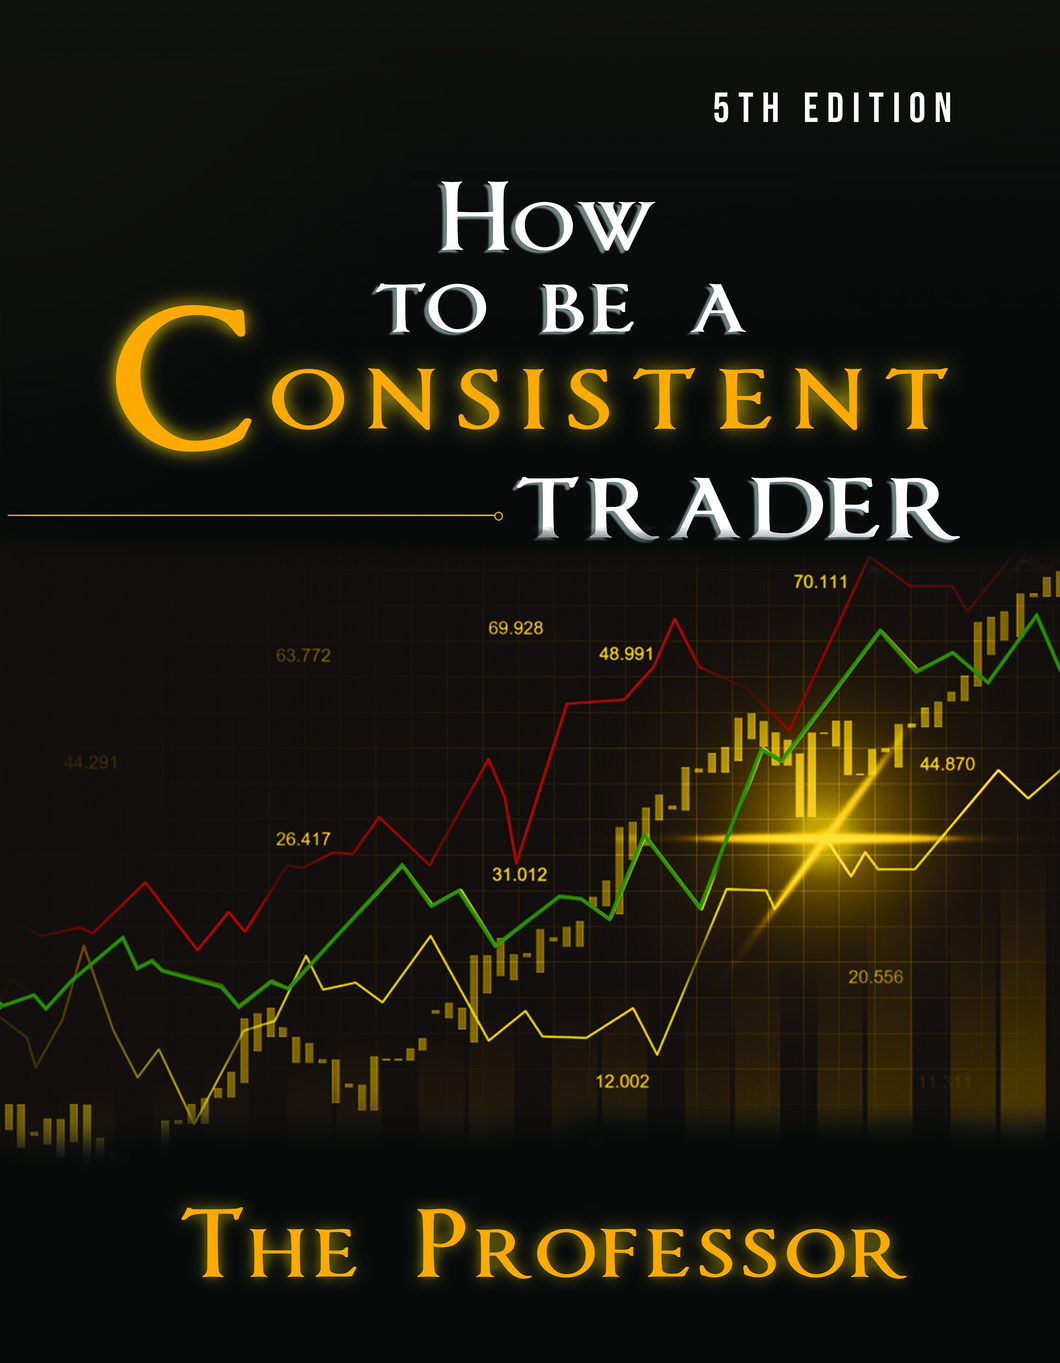 How To Be A Consistent Trader